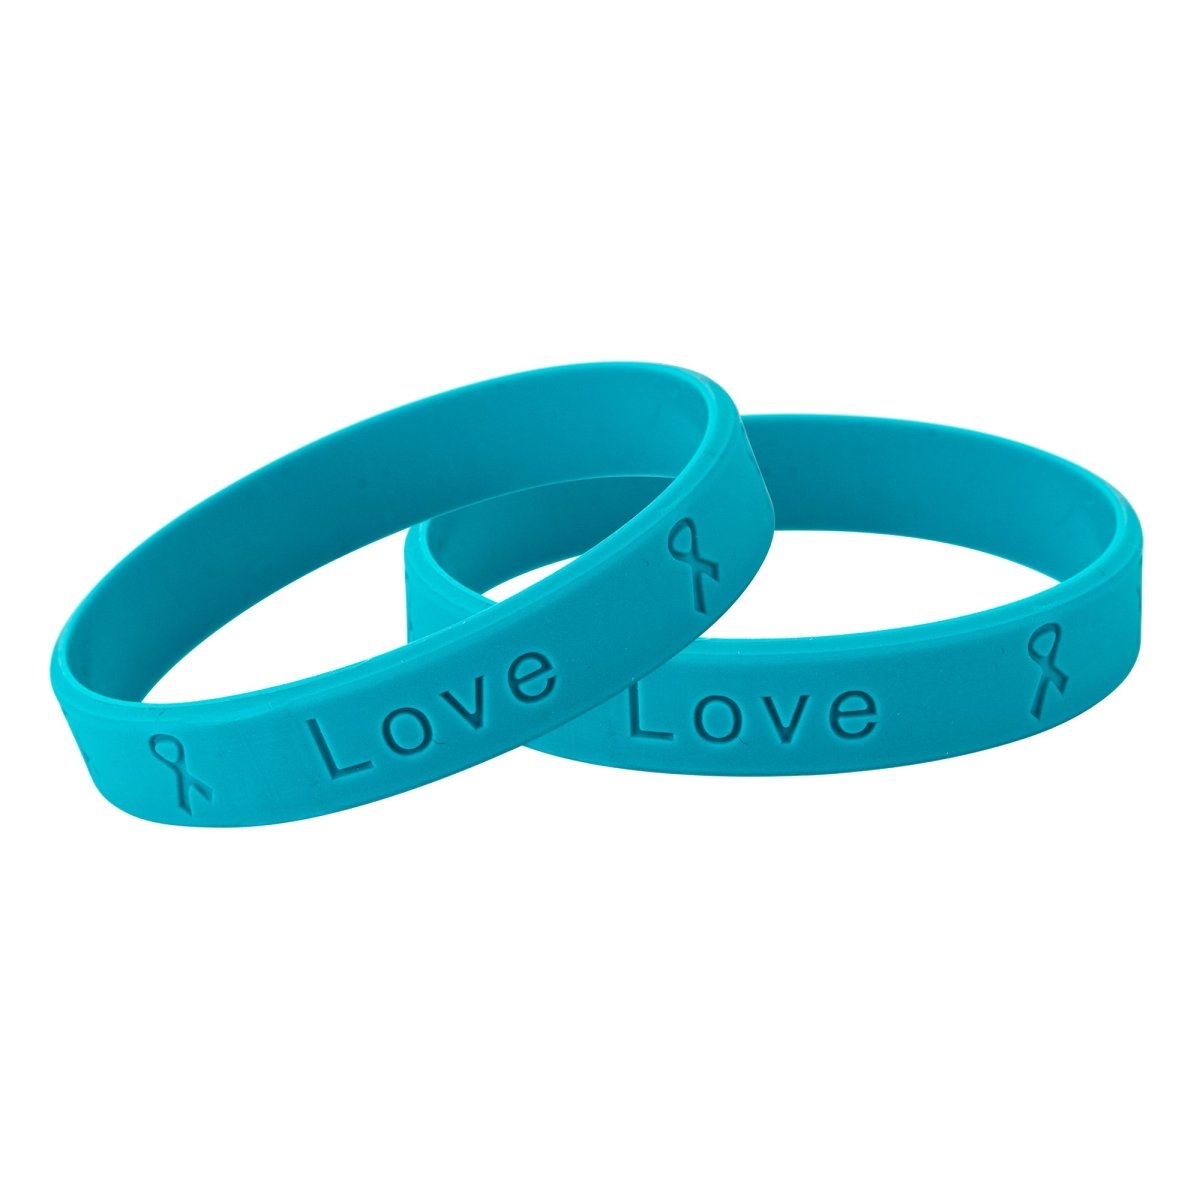 Batten Disease Awareness Teal Silicone Bracelet Wristbands - Fundraising For A Cause